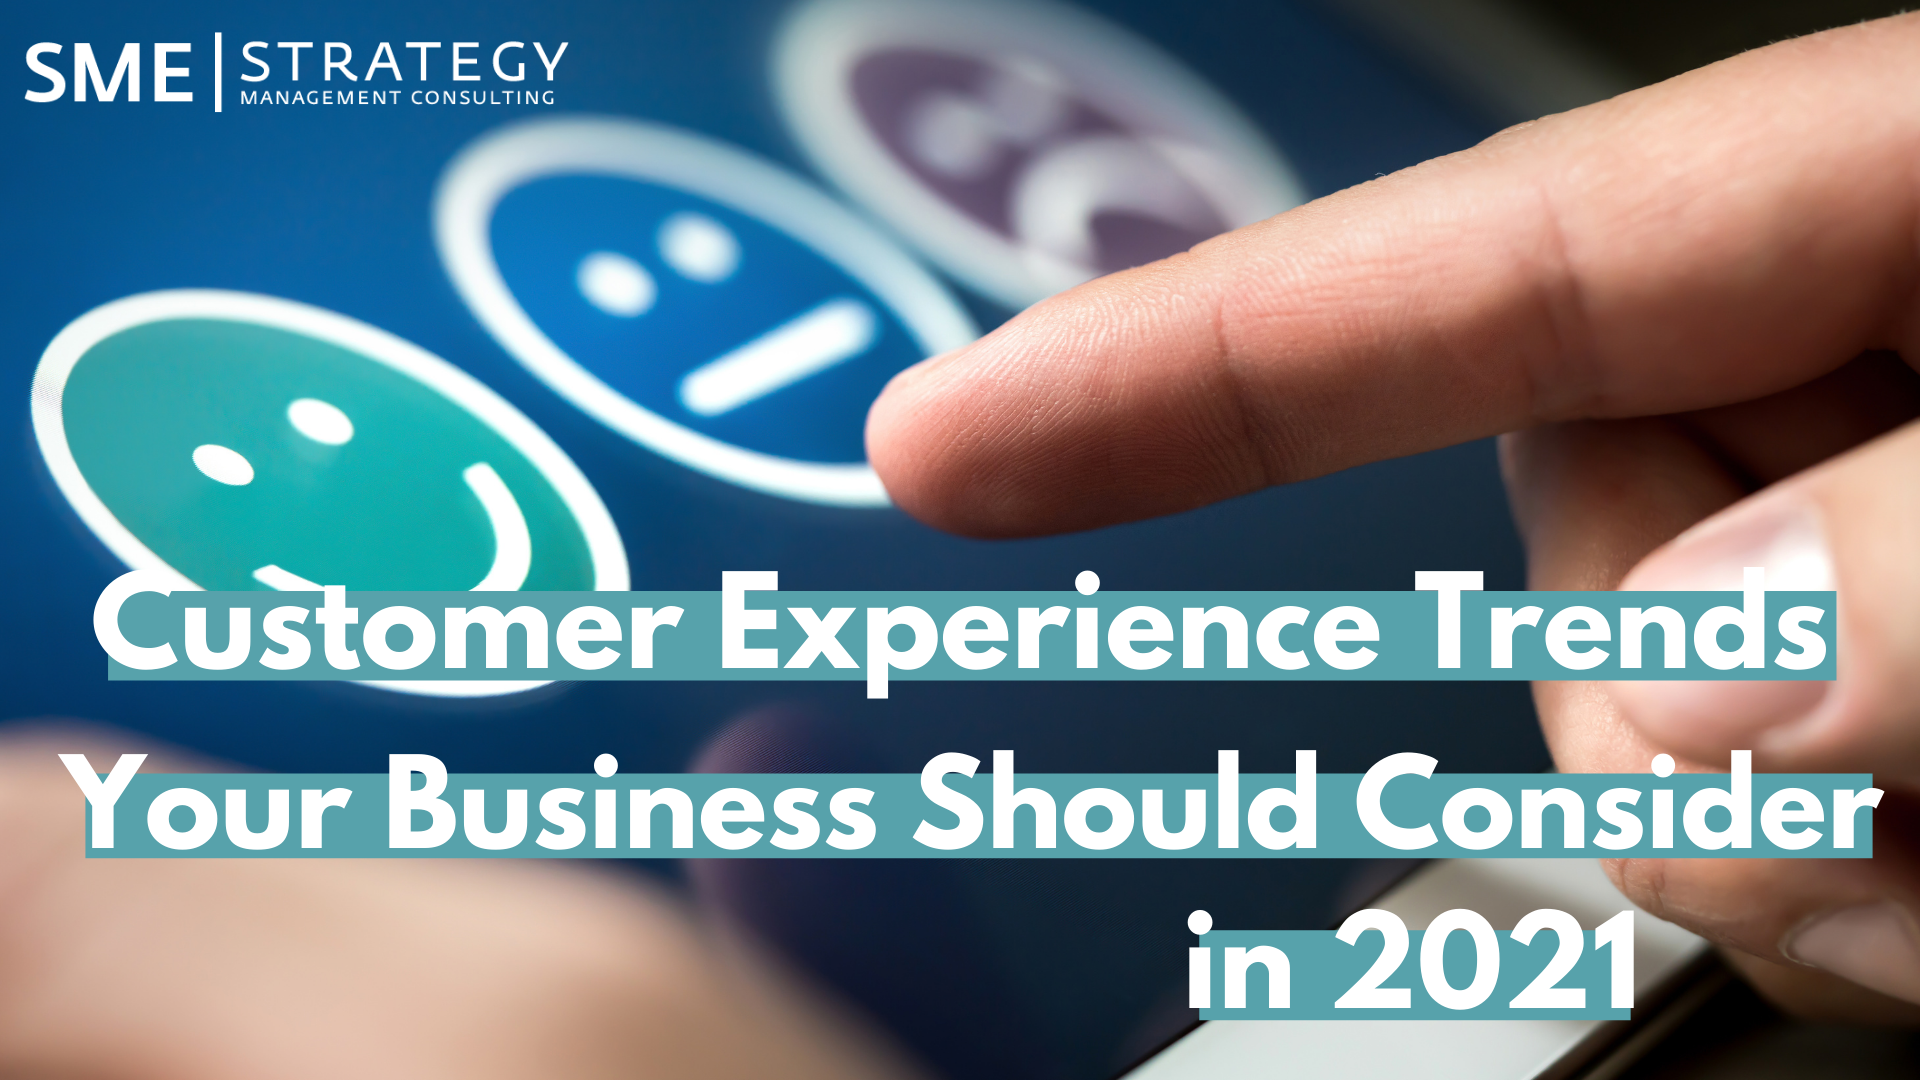 Customer Experience Trends Your Business Should Consider in 2021